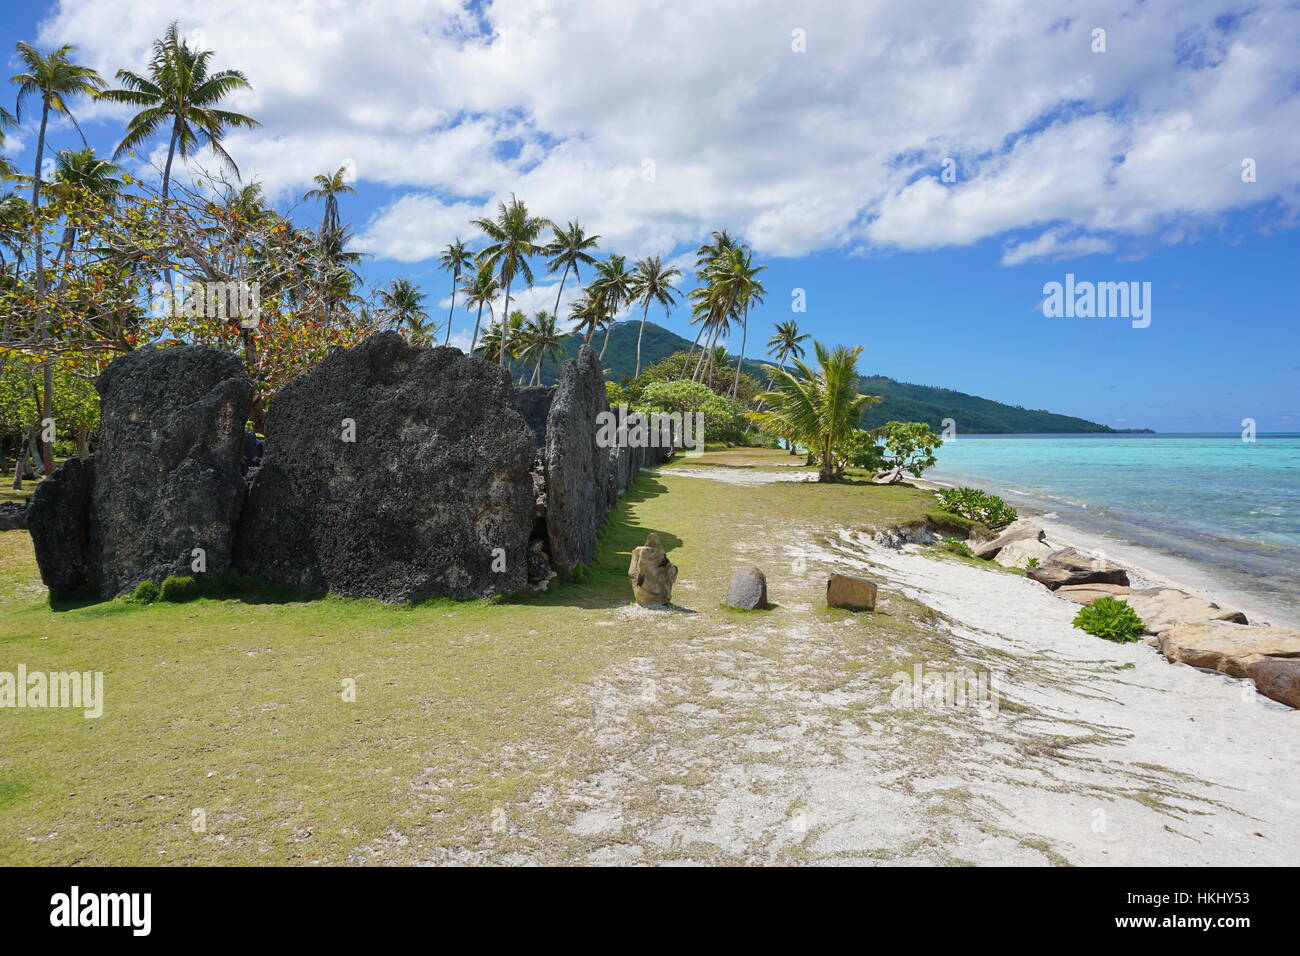 Tropical shore with ancient stone structure, the marae Anini on the south of the island of Huahine Iti, French Polynesia Stock Photo